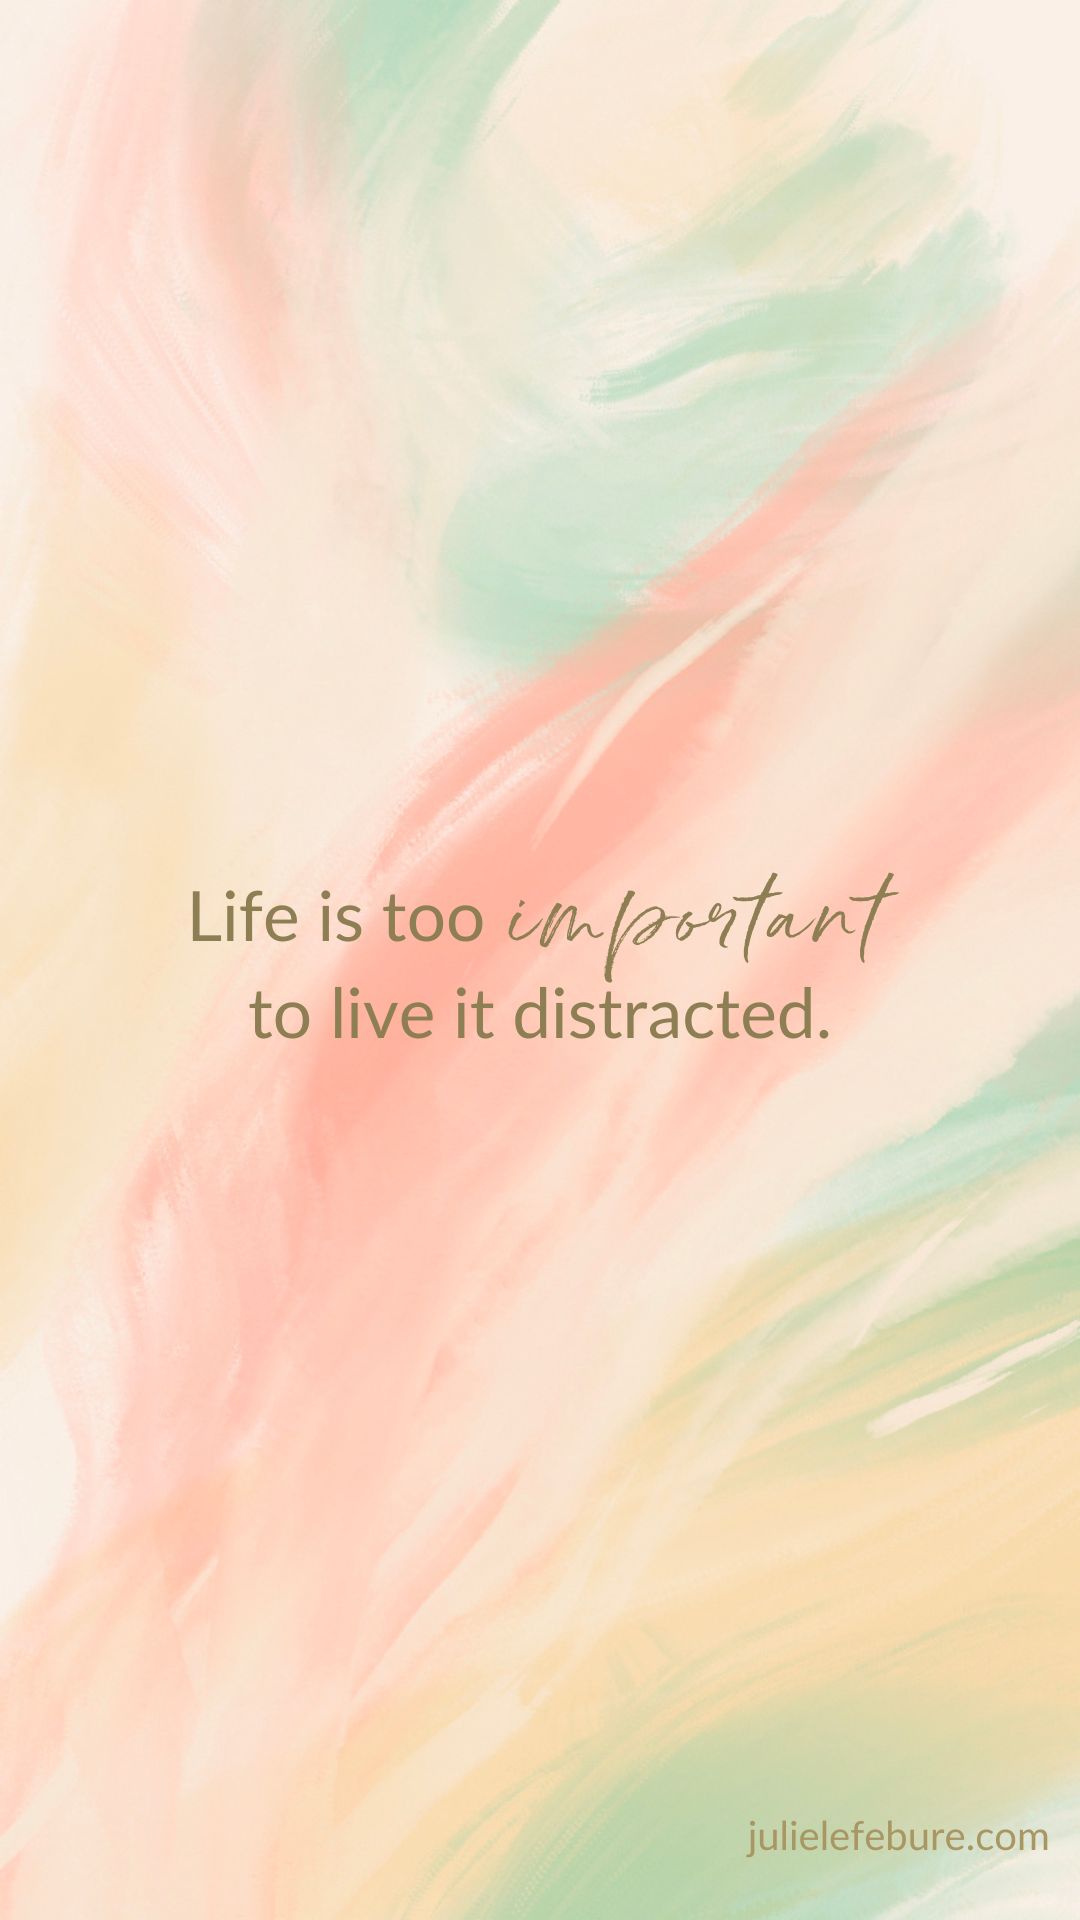 Life Is too Important to Live it Distracted lockscreen